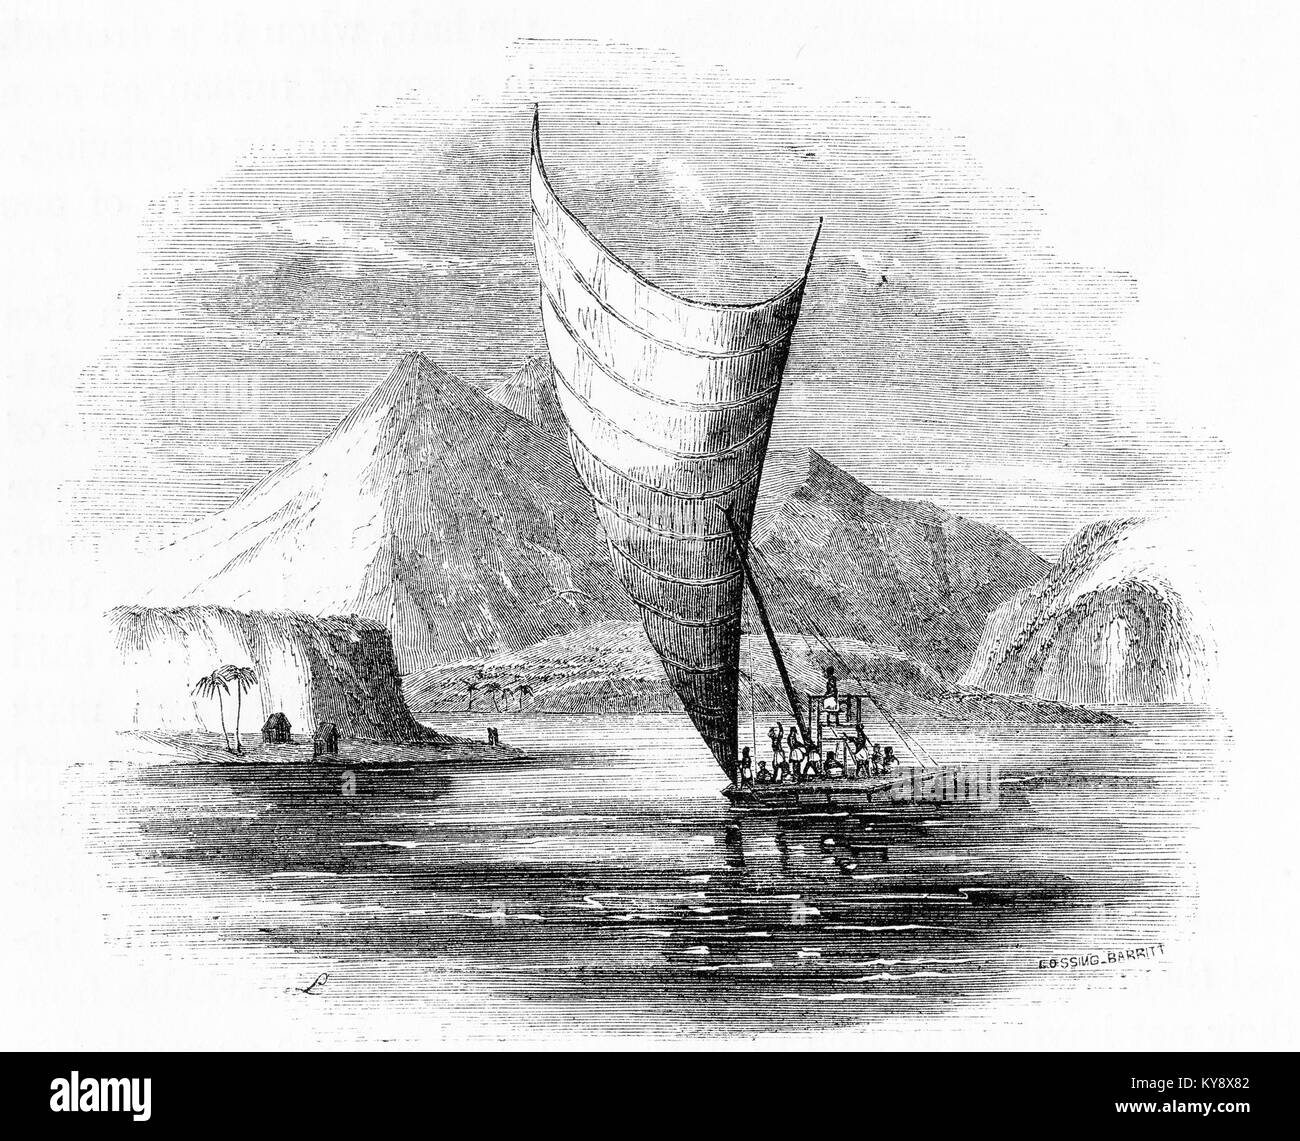 Engraving of a native canoe in the South Seas, most likely Fiji. From an original engraving in the Harper's Story Books by Jacob Abbott, 1854. Stock Photo